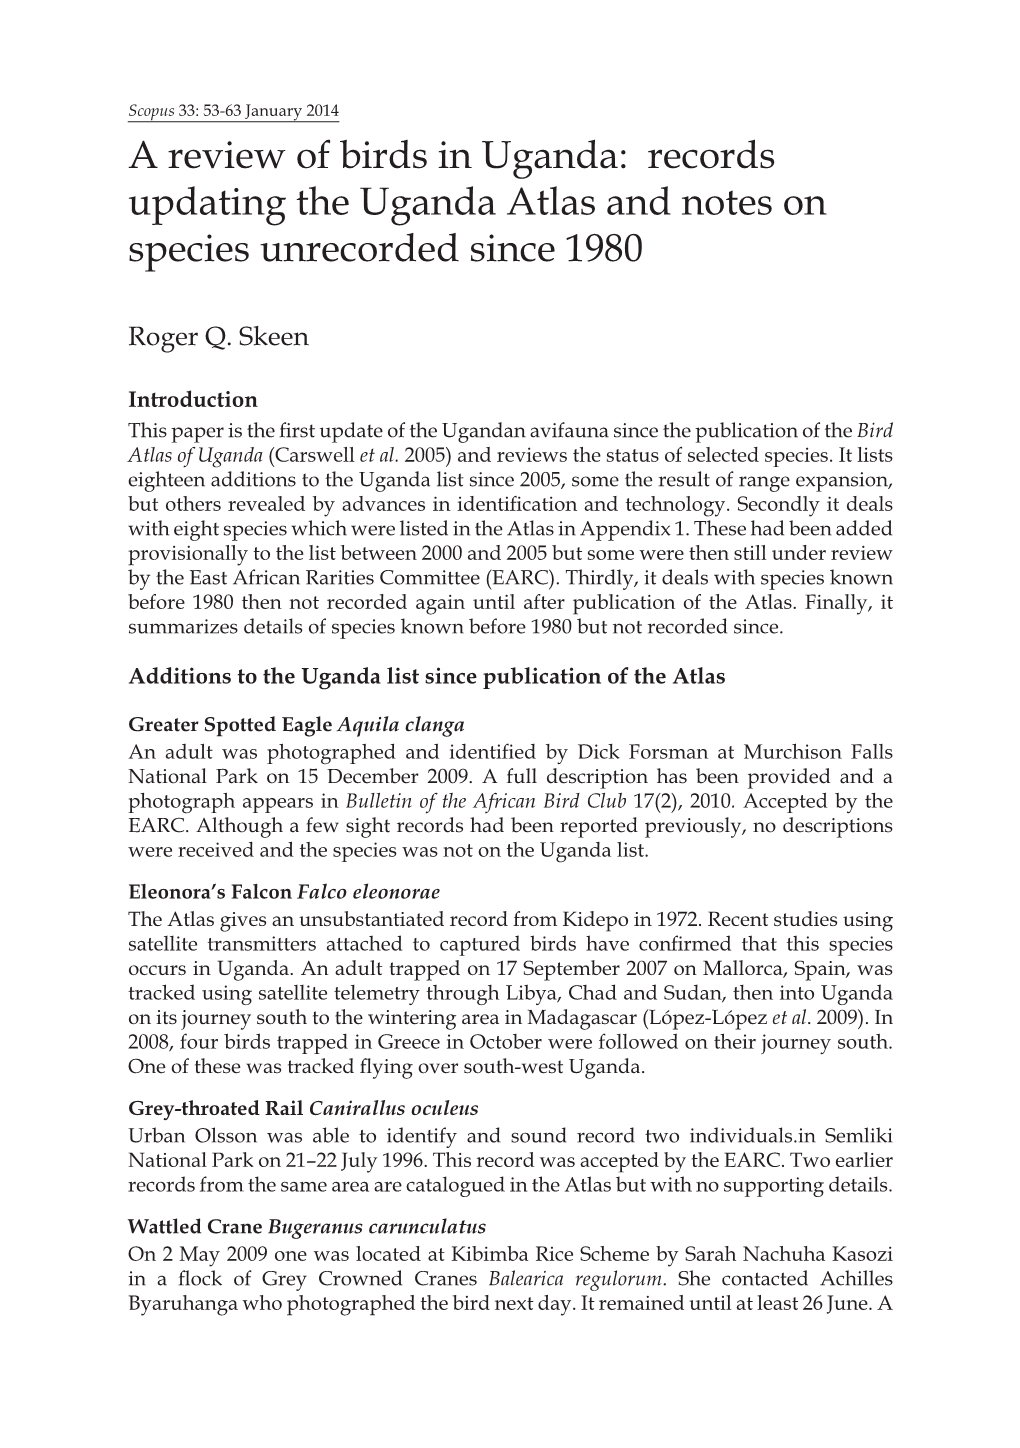 A Review of Birds in Uganda: Records Updating the Uganda Atlas and Notes on Species Unrecorded Since 1980